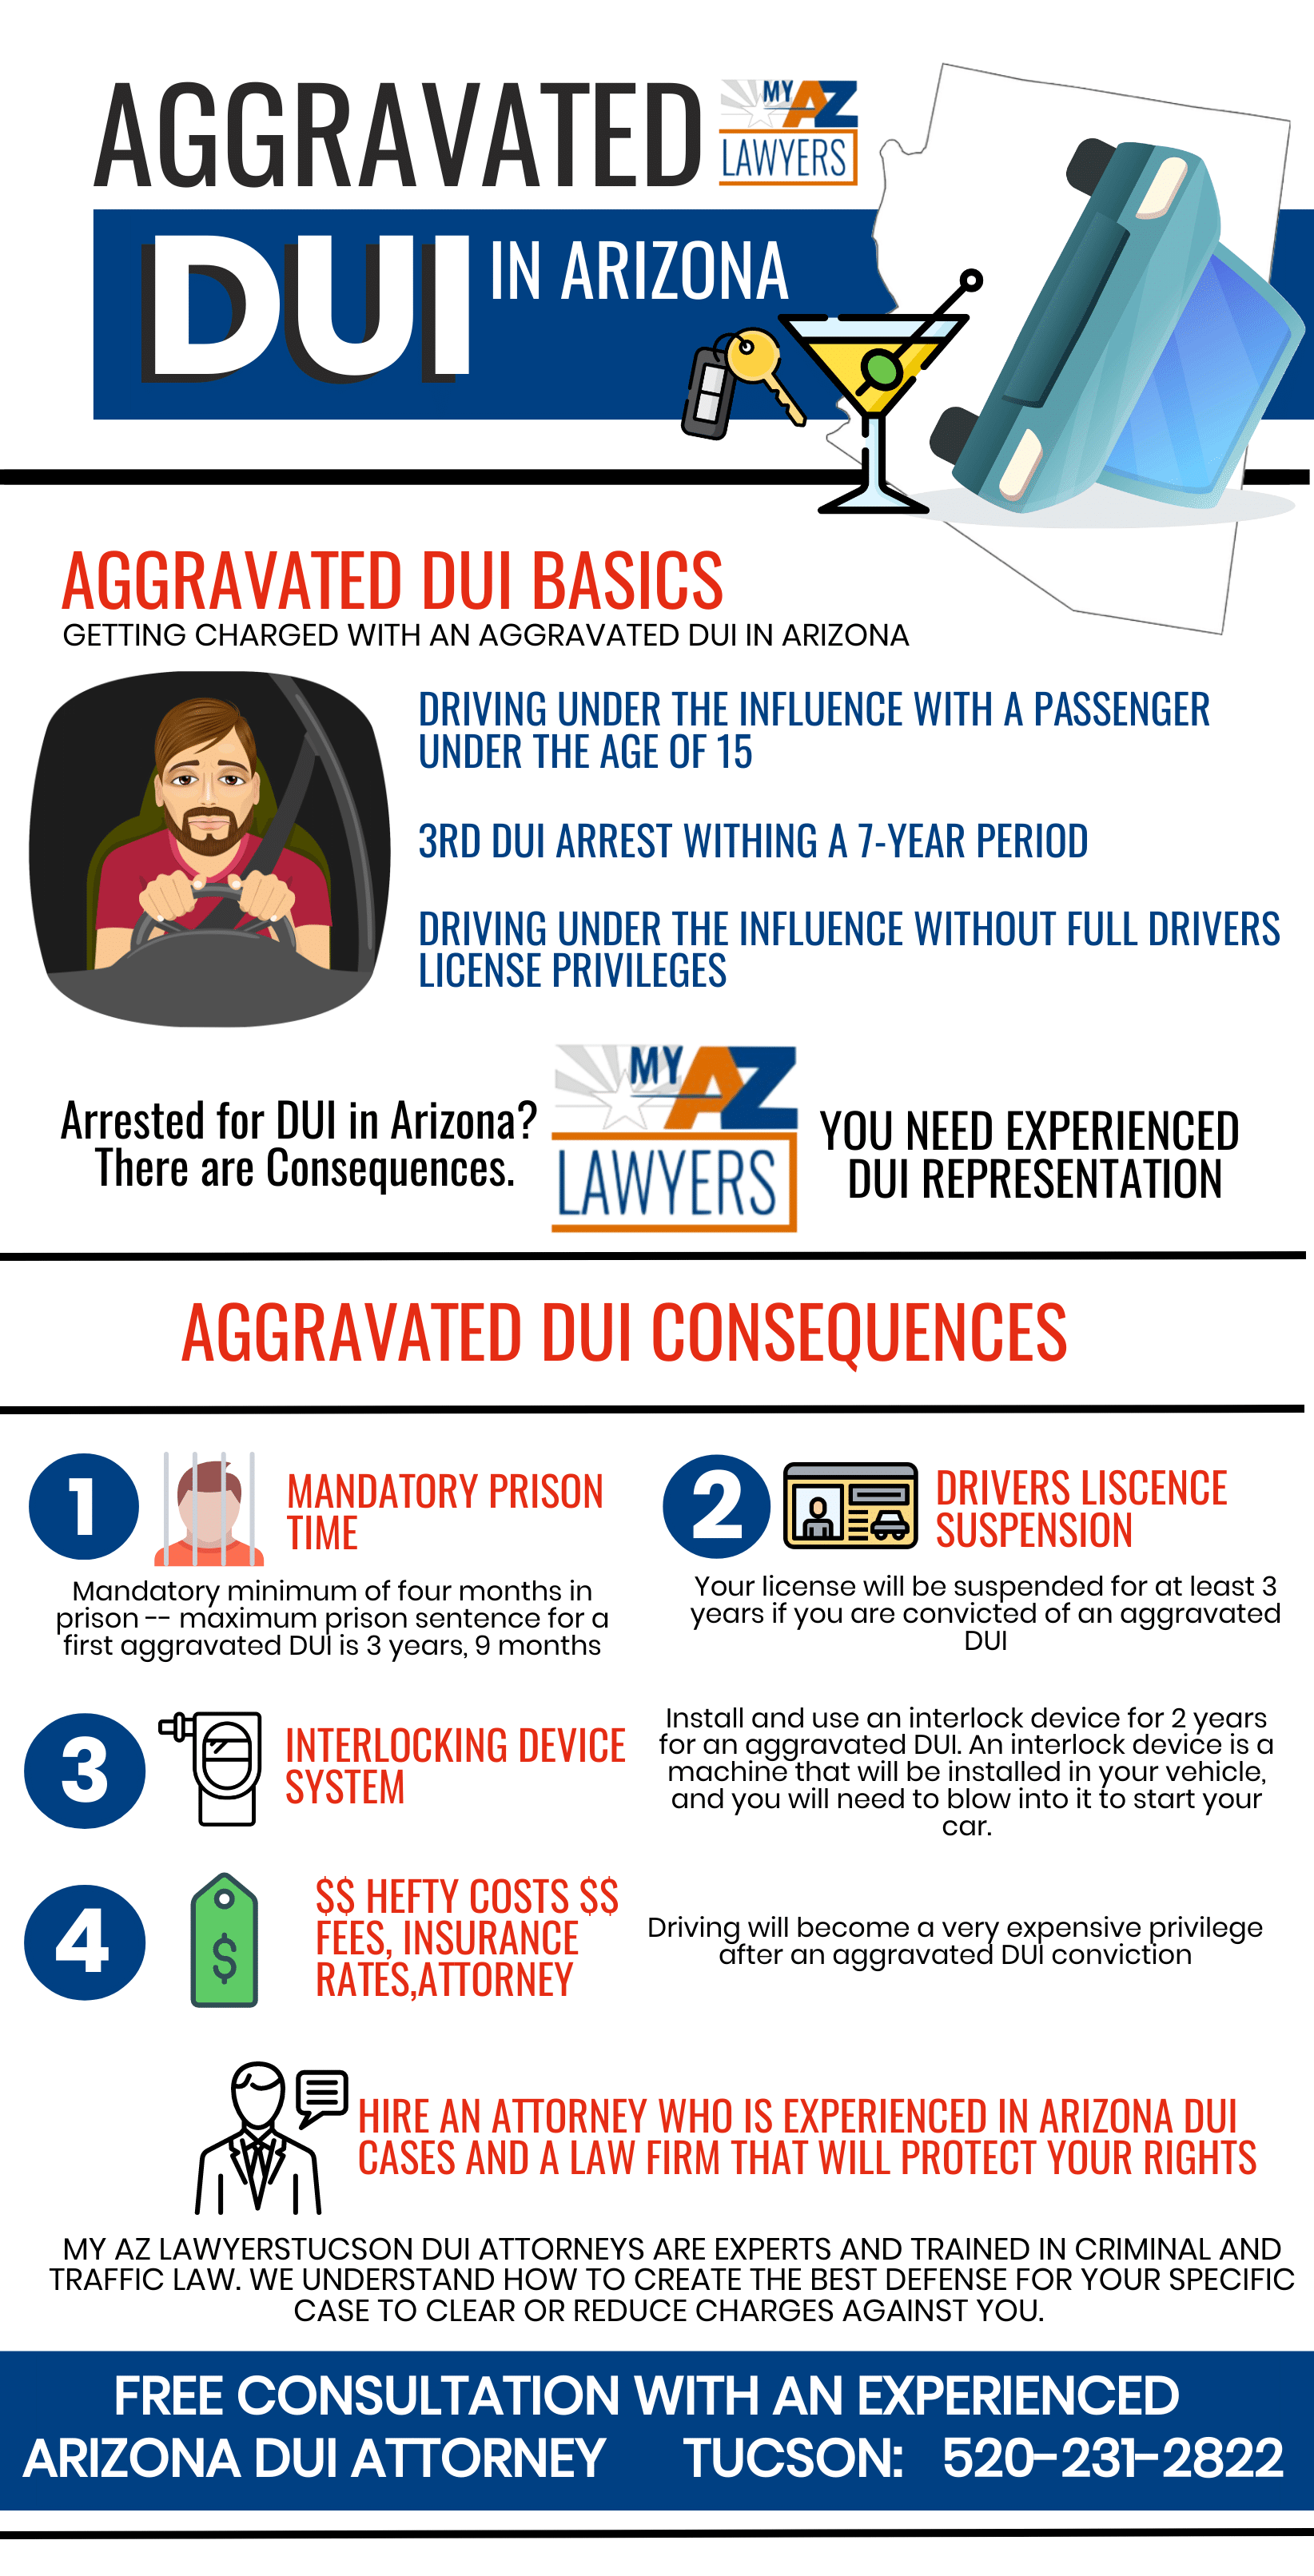 AGGRAVATD DUI INFOGRAPHIC, Your Arizona Lawyer, Tucson DUI Lawyers, DUI Attorneys in Tucson, Driving Under the Influence in Tucson